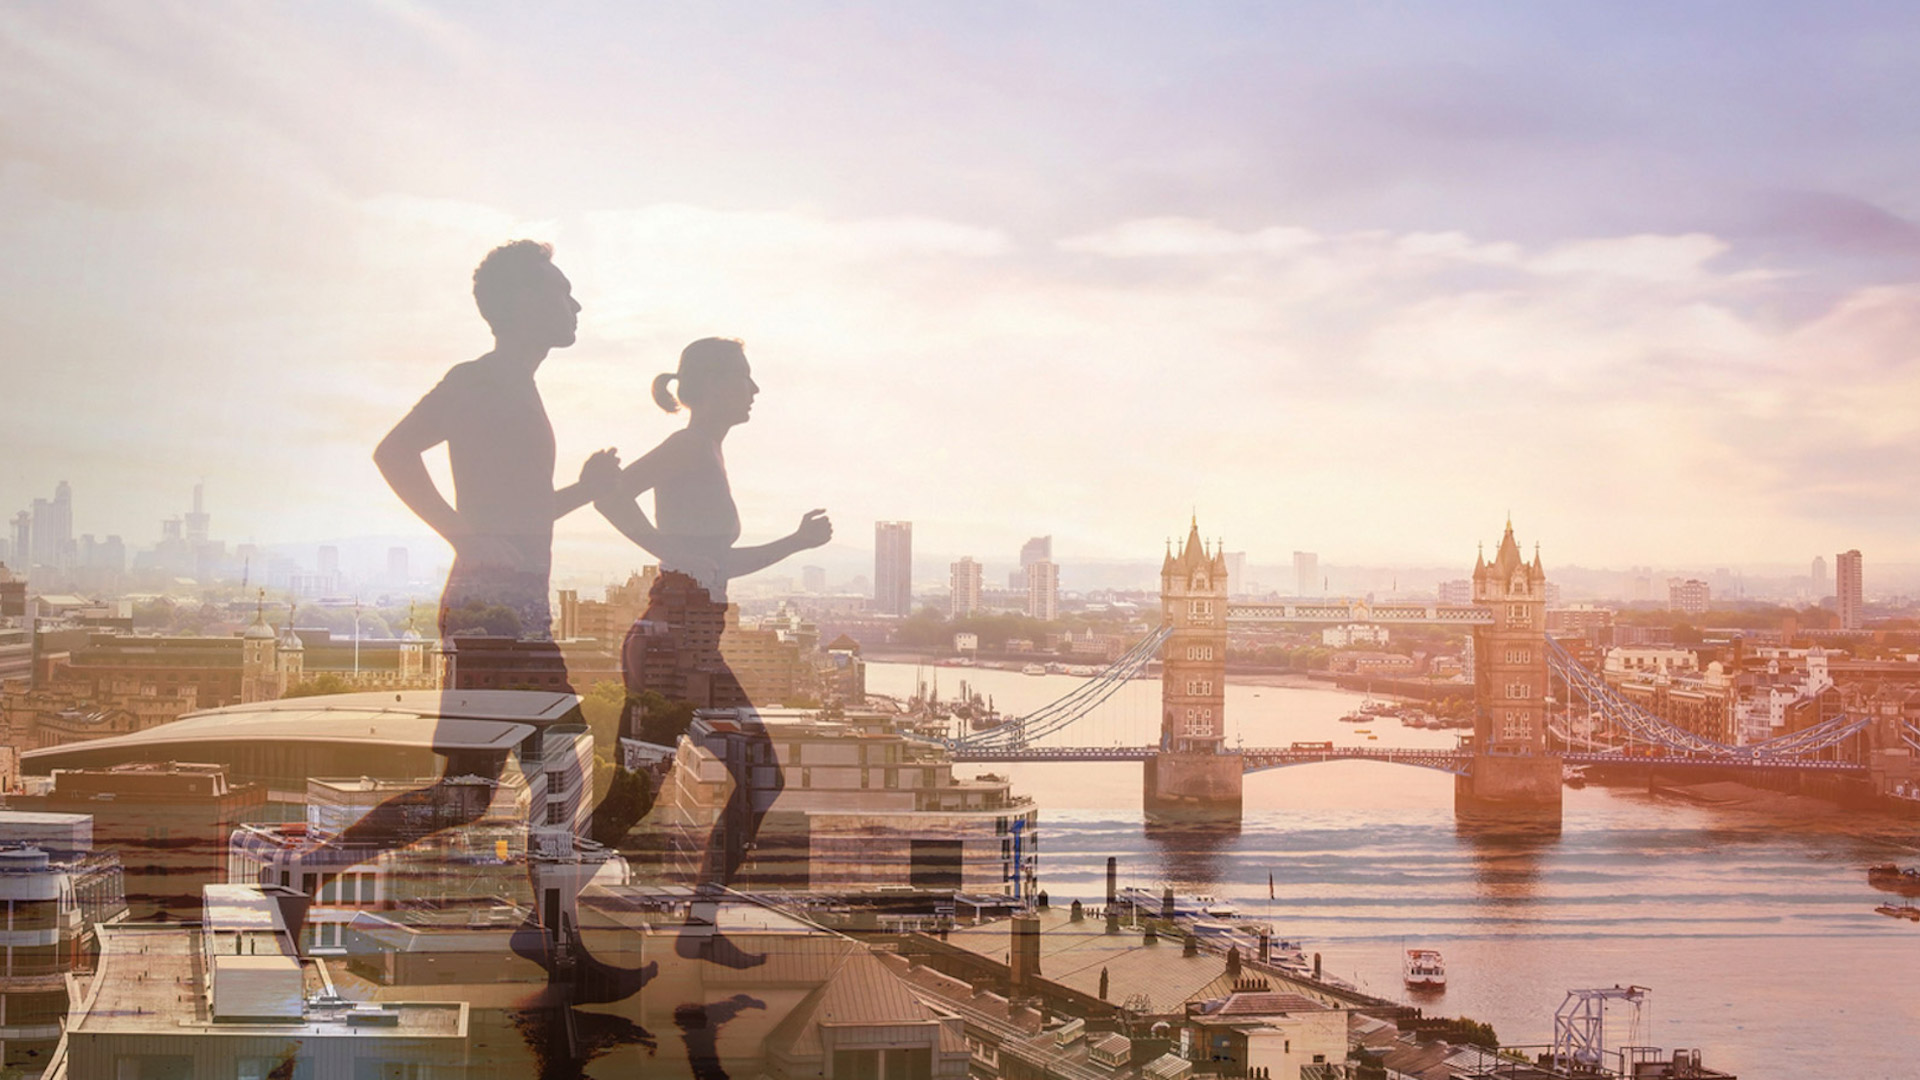 Trail Running Races Rear London | 5 of the Best, Runners silhouetted over London